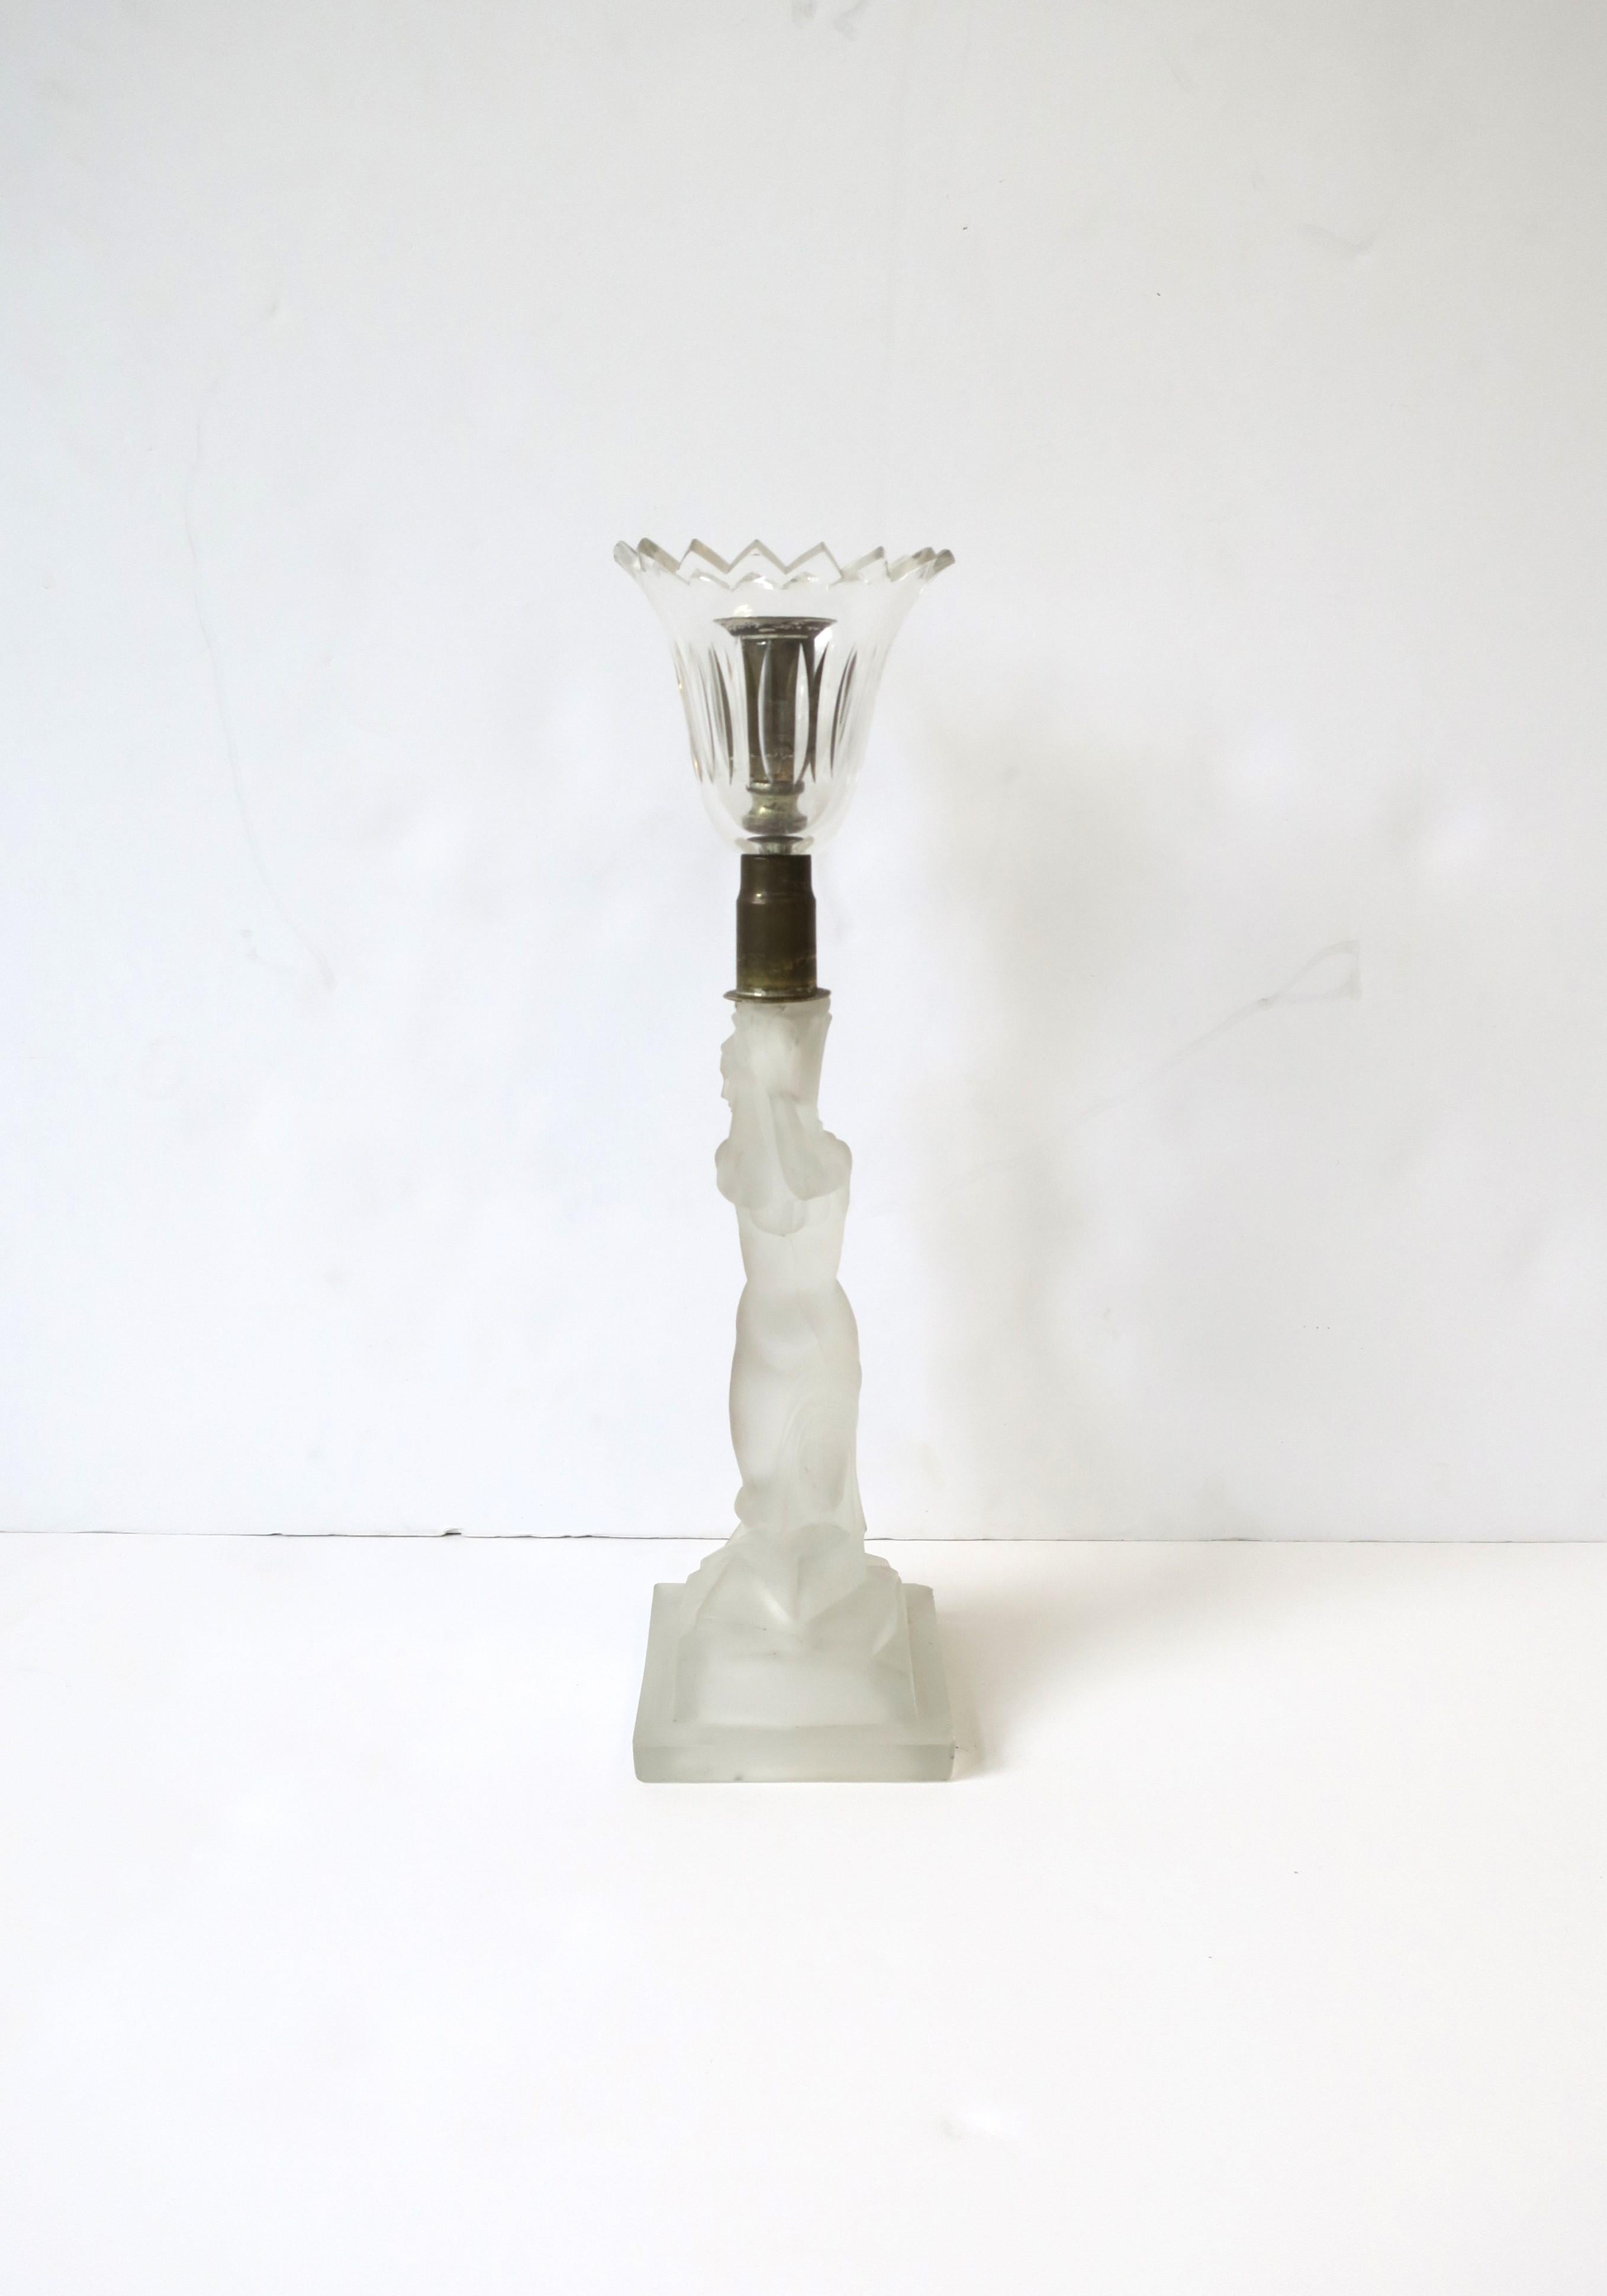 Art Deco Female Figurative Sculpture Candlestick Holder, Early 20th Century For Sale 4